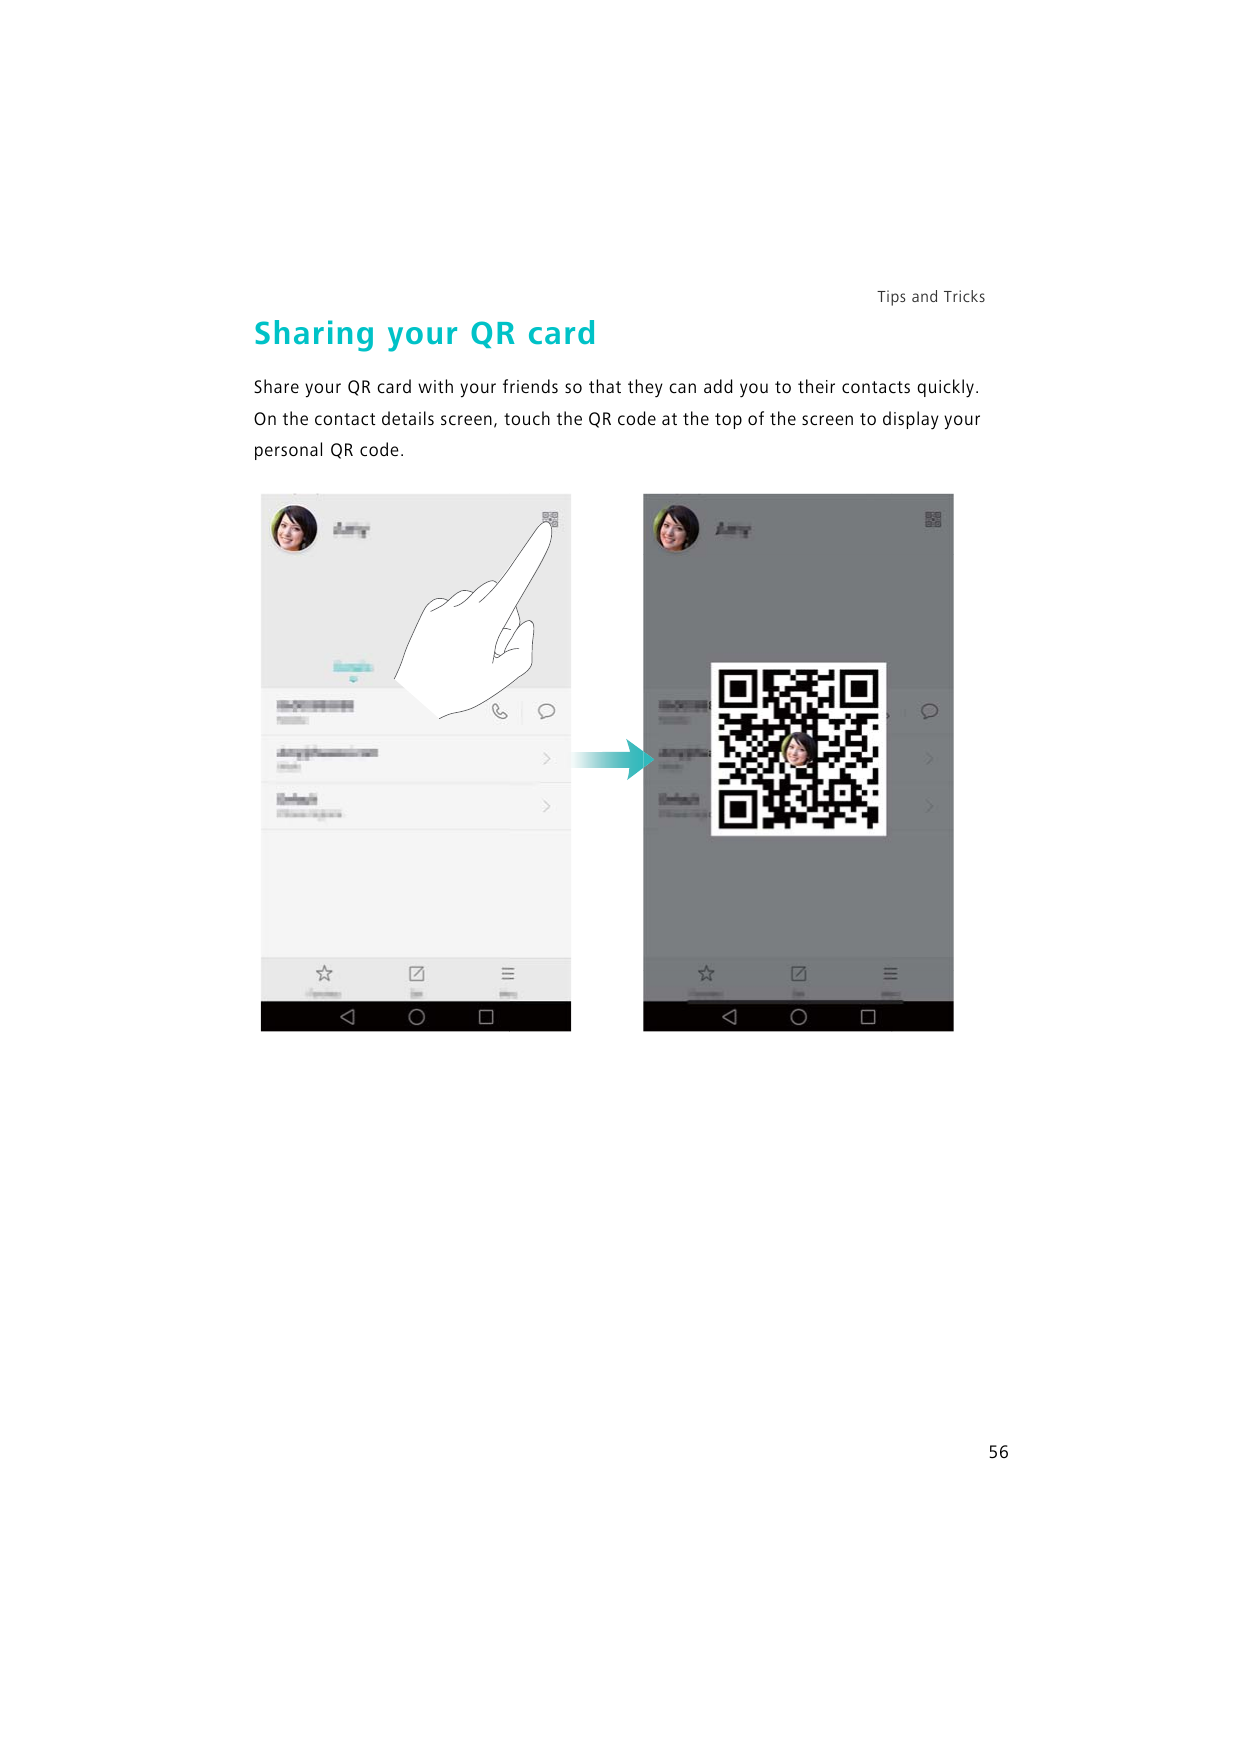 Tips and TricksSharing your QR cardShare your QR card with your friends so that they can add you to their contacts quickly.On th